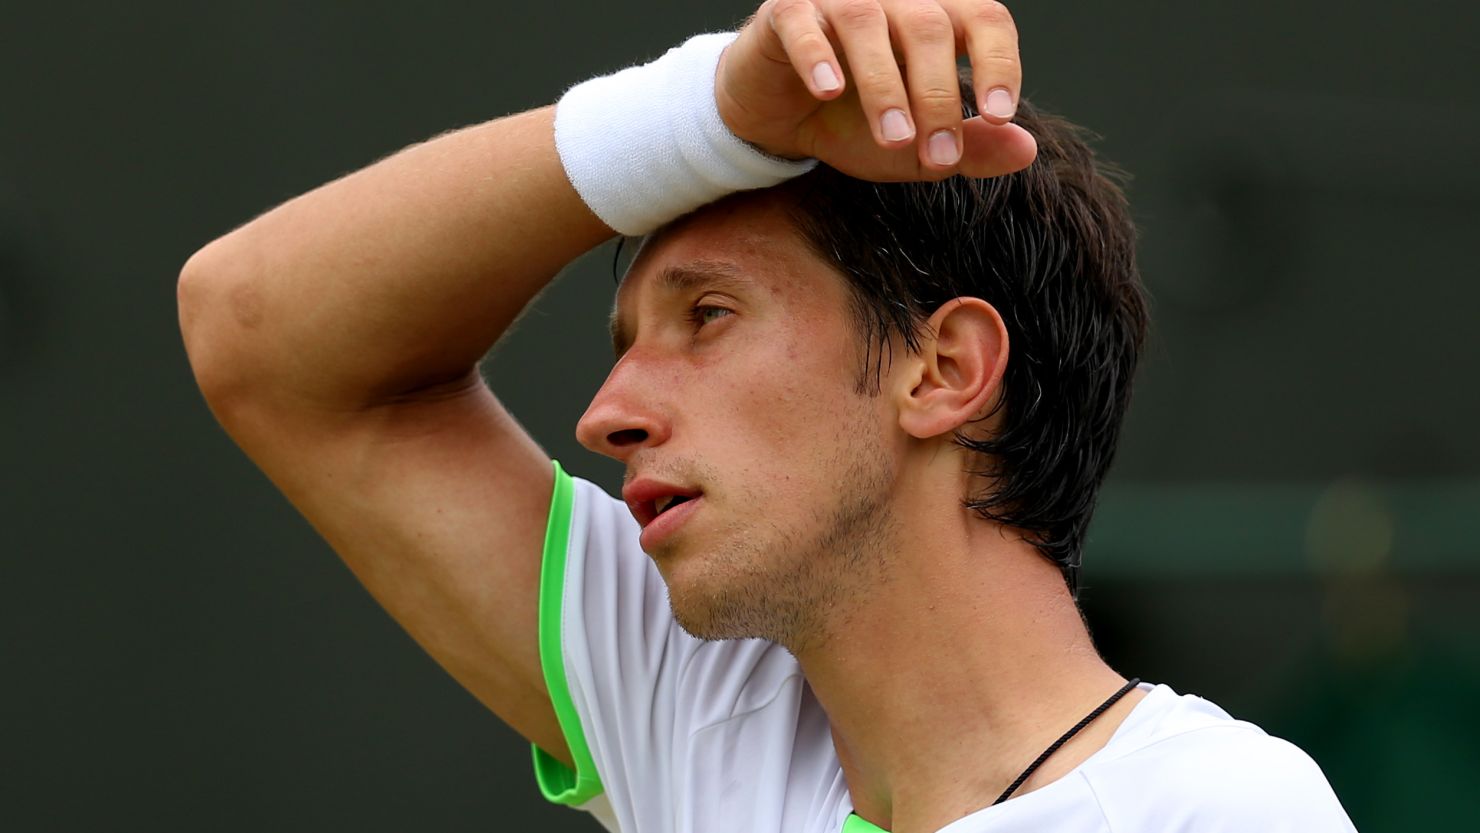 A dejected Sergiy Stakhovsky on his way to defeat against Austria's Jurgen Melzer in their third round match at Wimbledon.